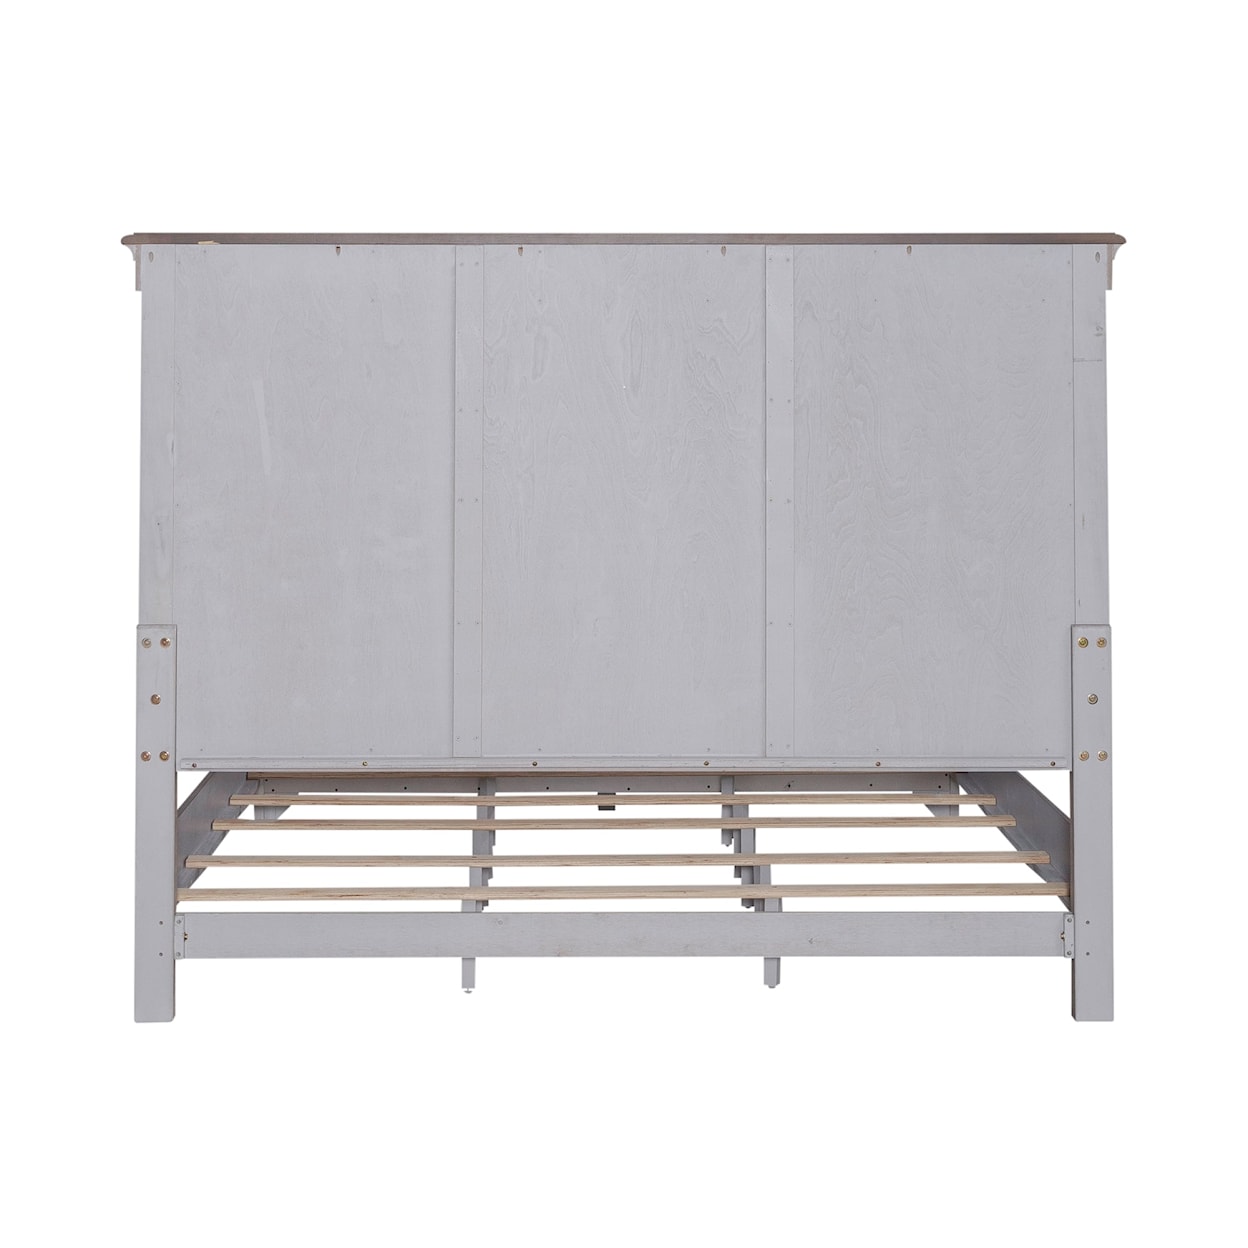 Liberty Furniture Ivy Hollow King Storage Bed